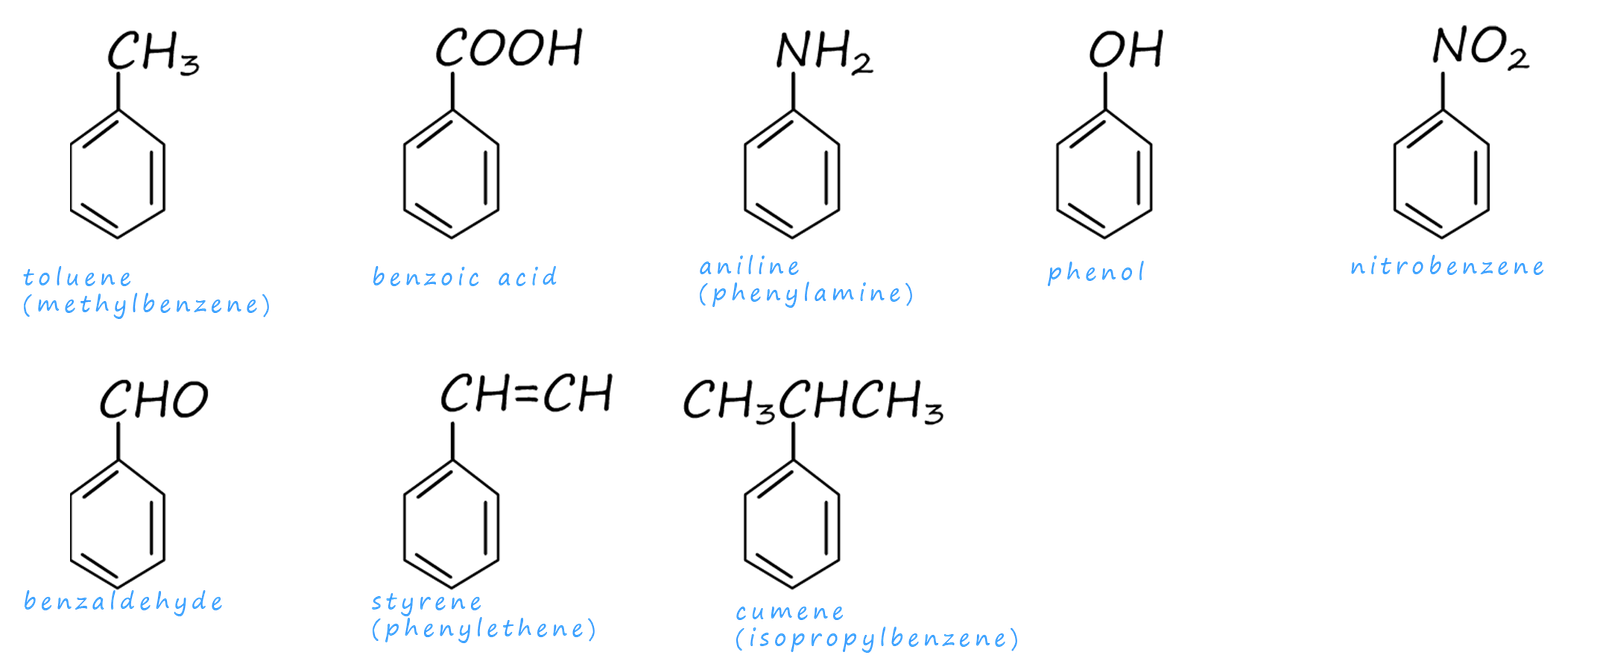 many aromatic compounds are given non-systematic or trivial names